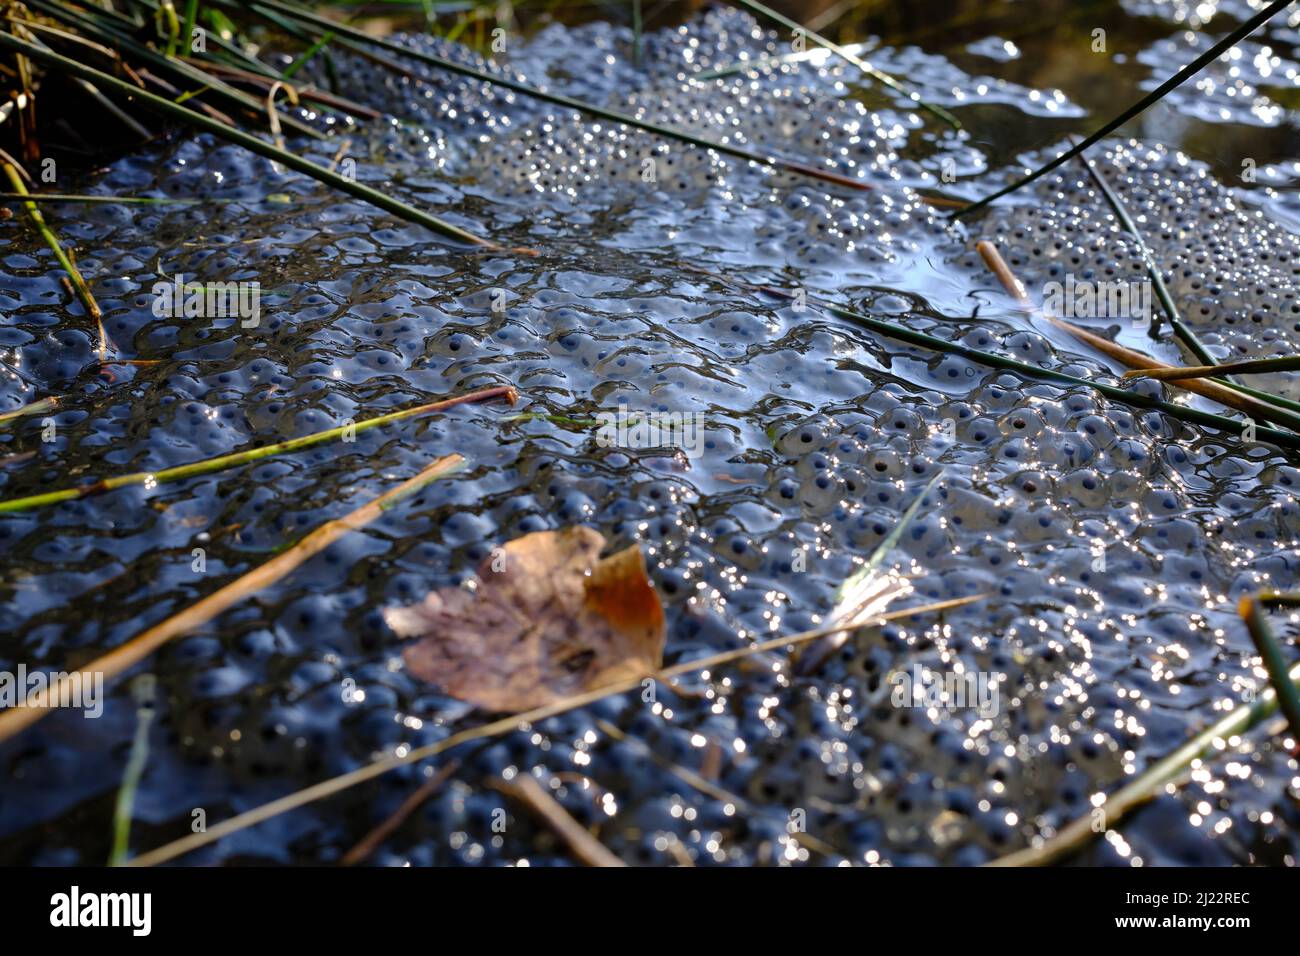 closeup of frog spawn in a natural pond environment in the British countryside Stock Photo